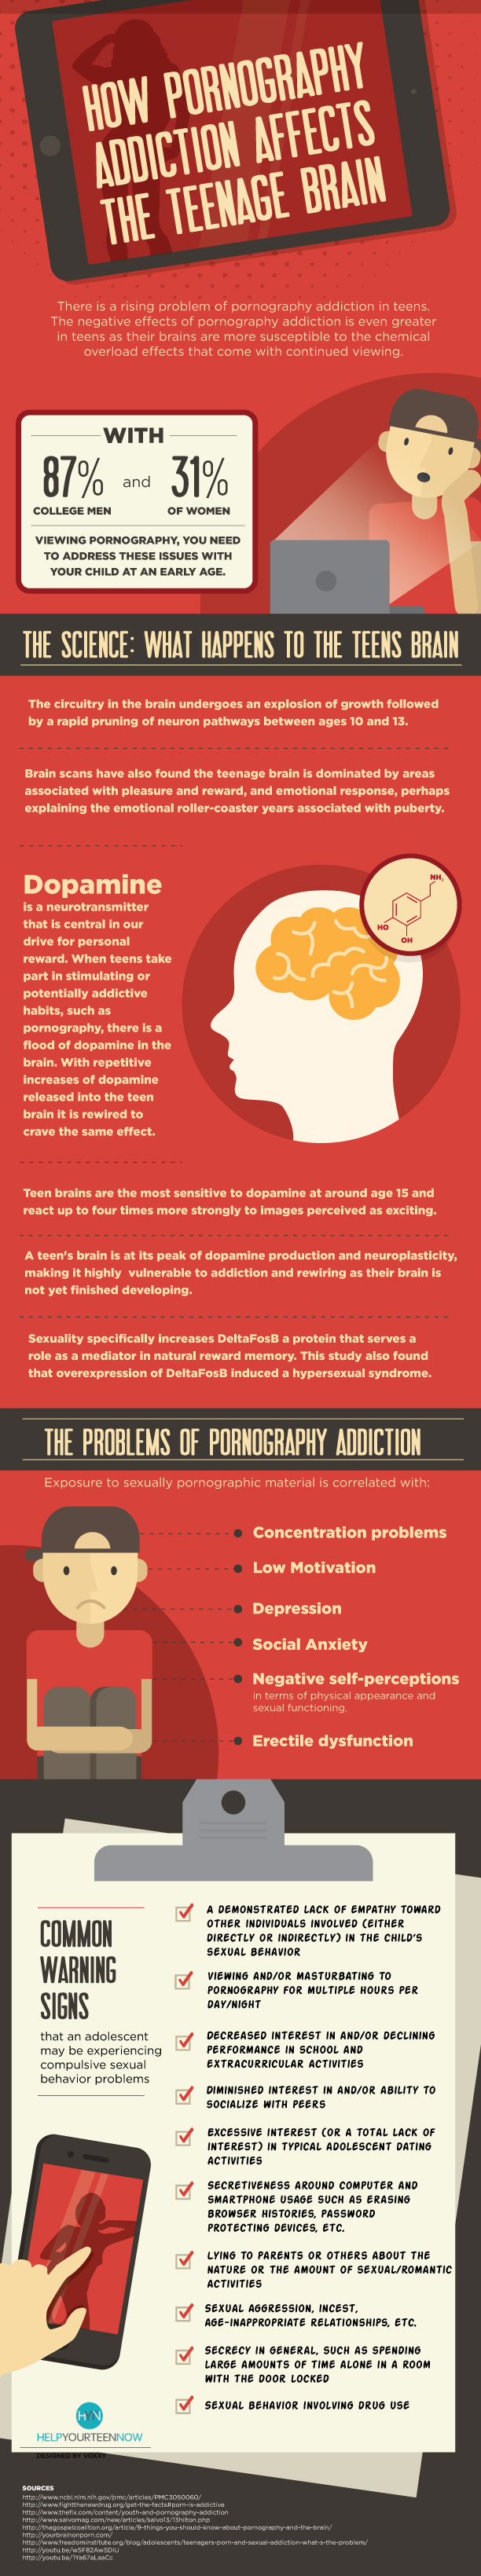 How Pornography Addiction Affects the Teenage Brain